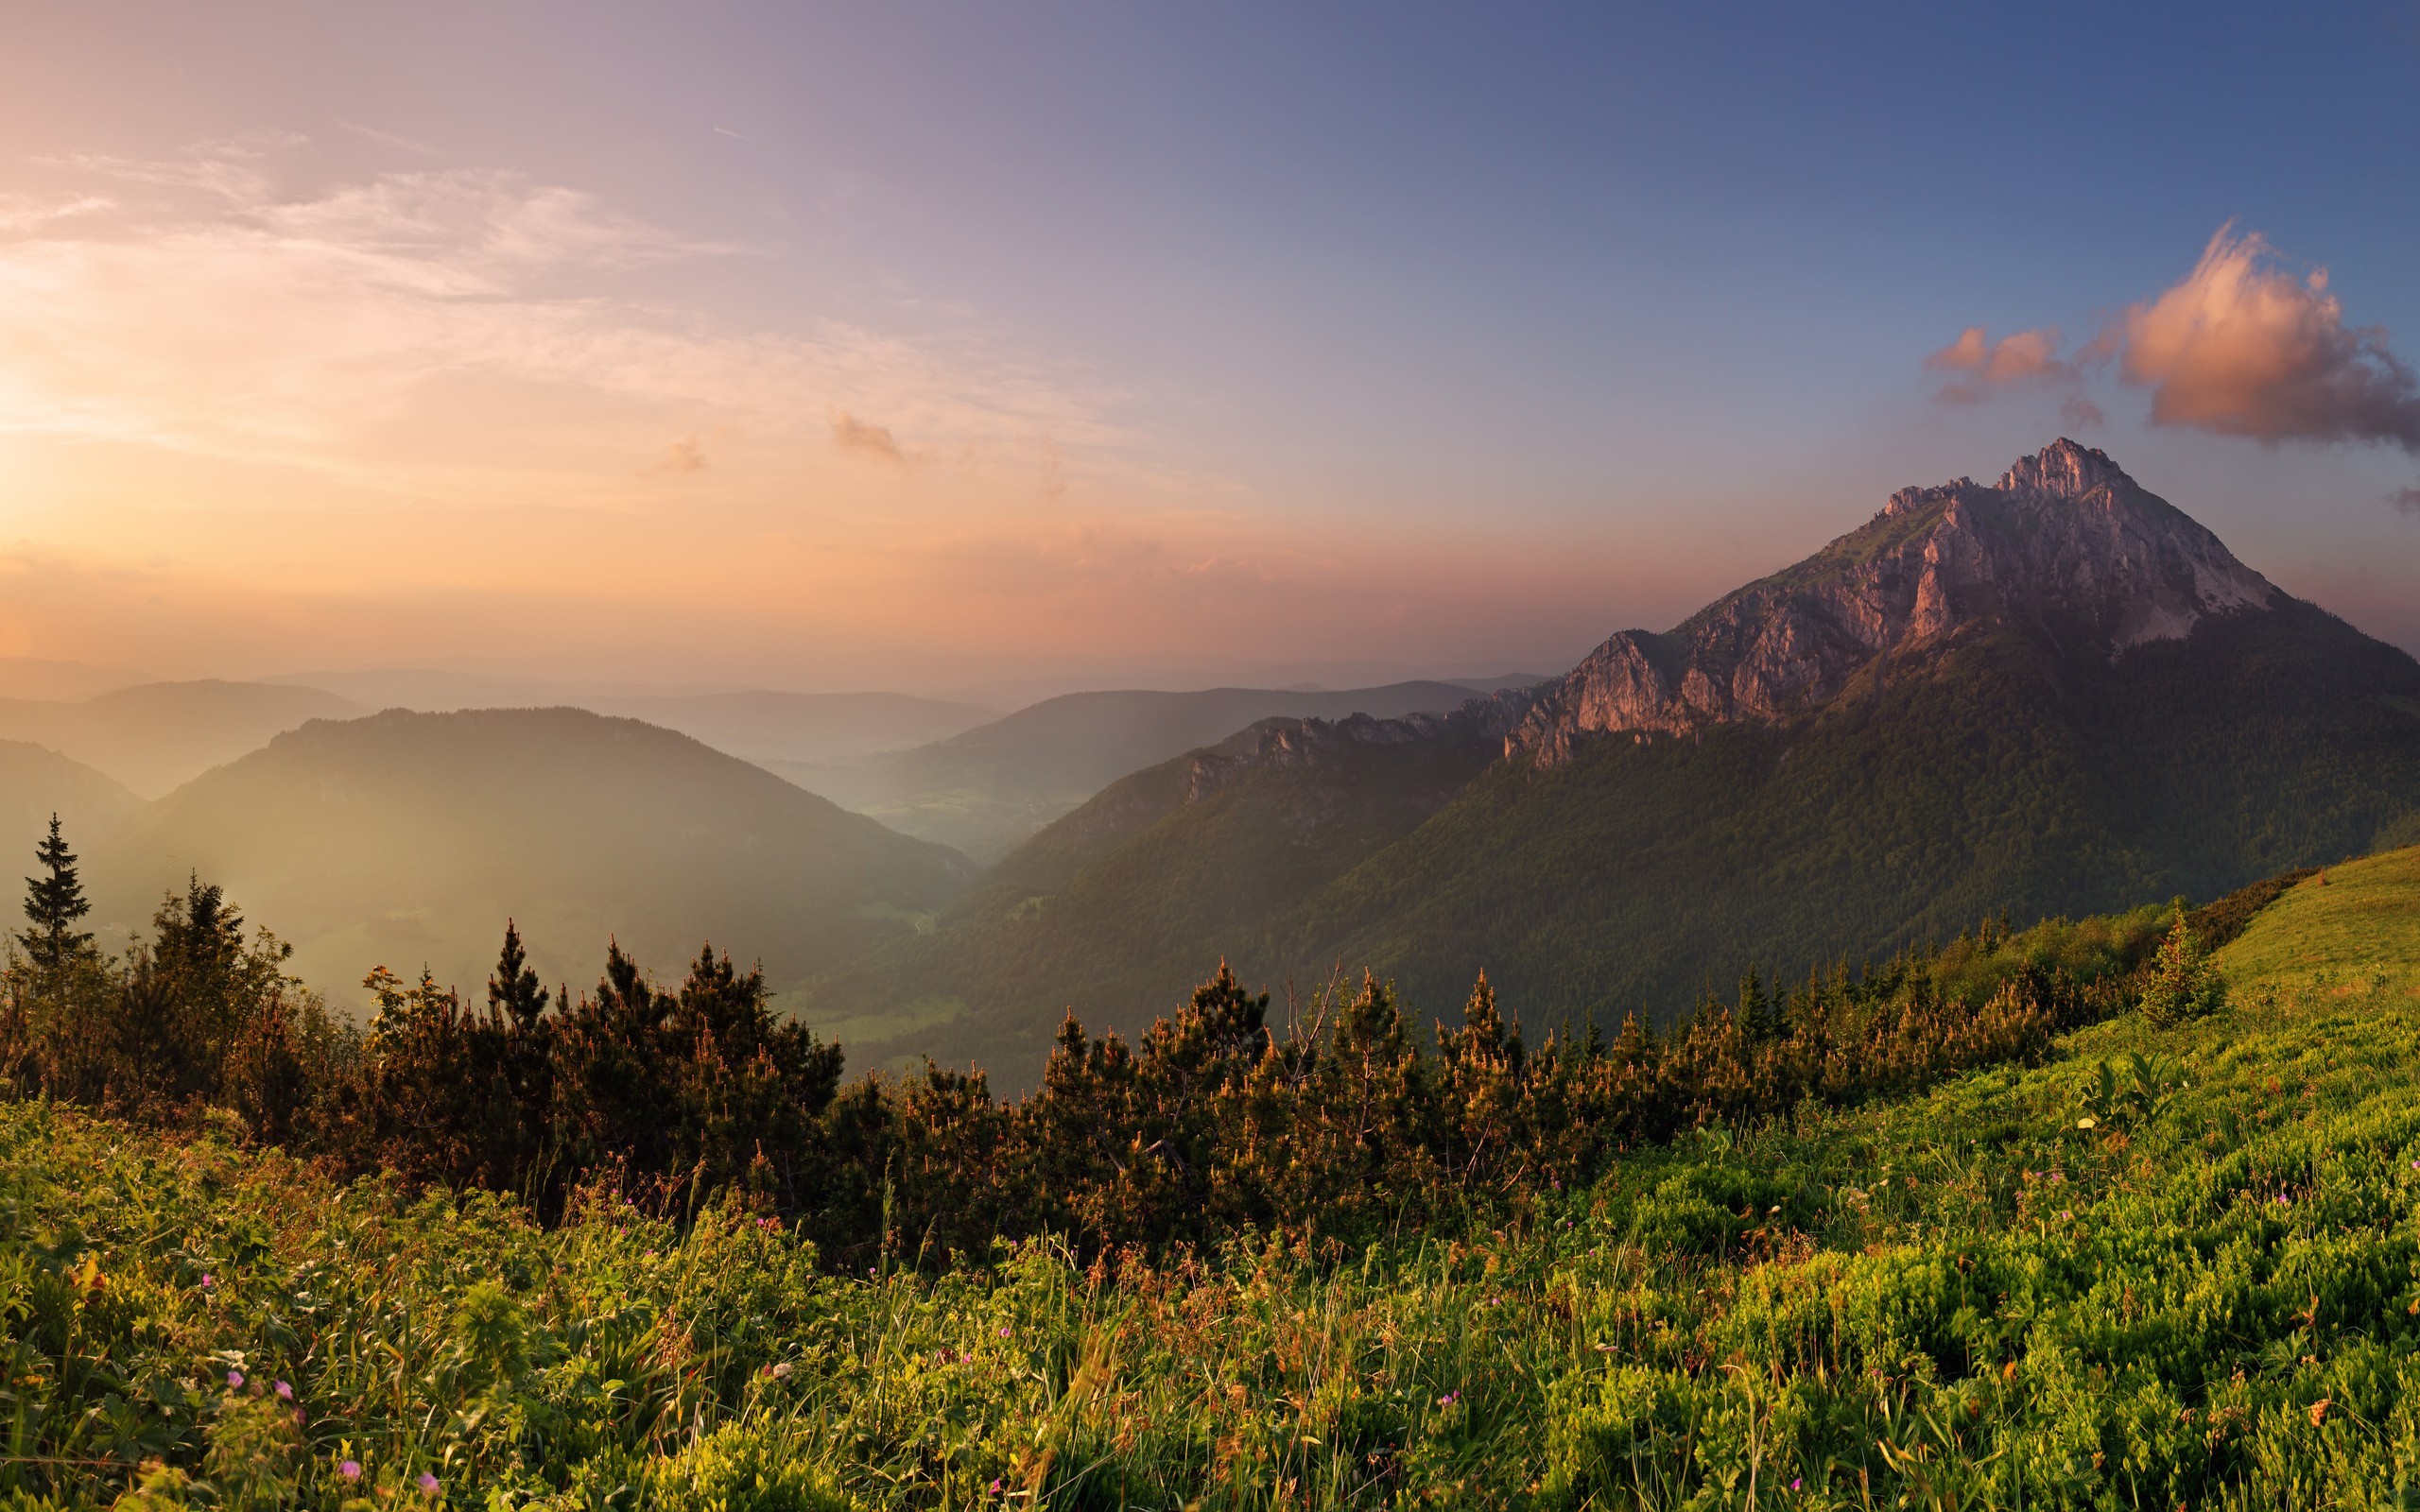 General 2560x1600 mountains nature landscape outdoors sunset